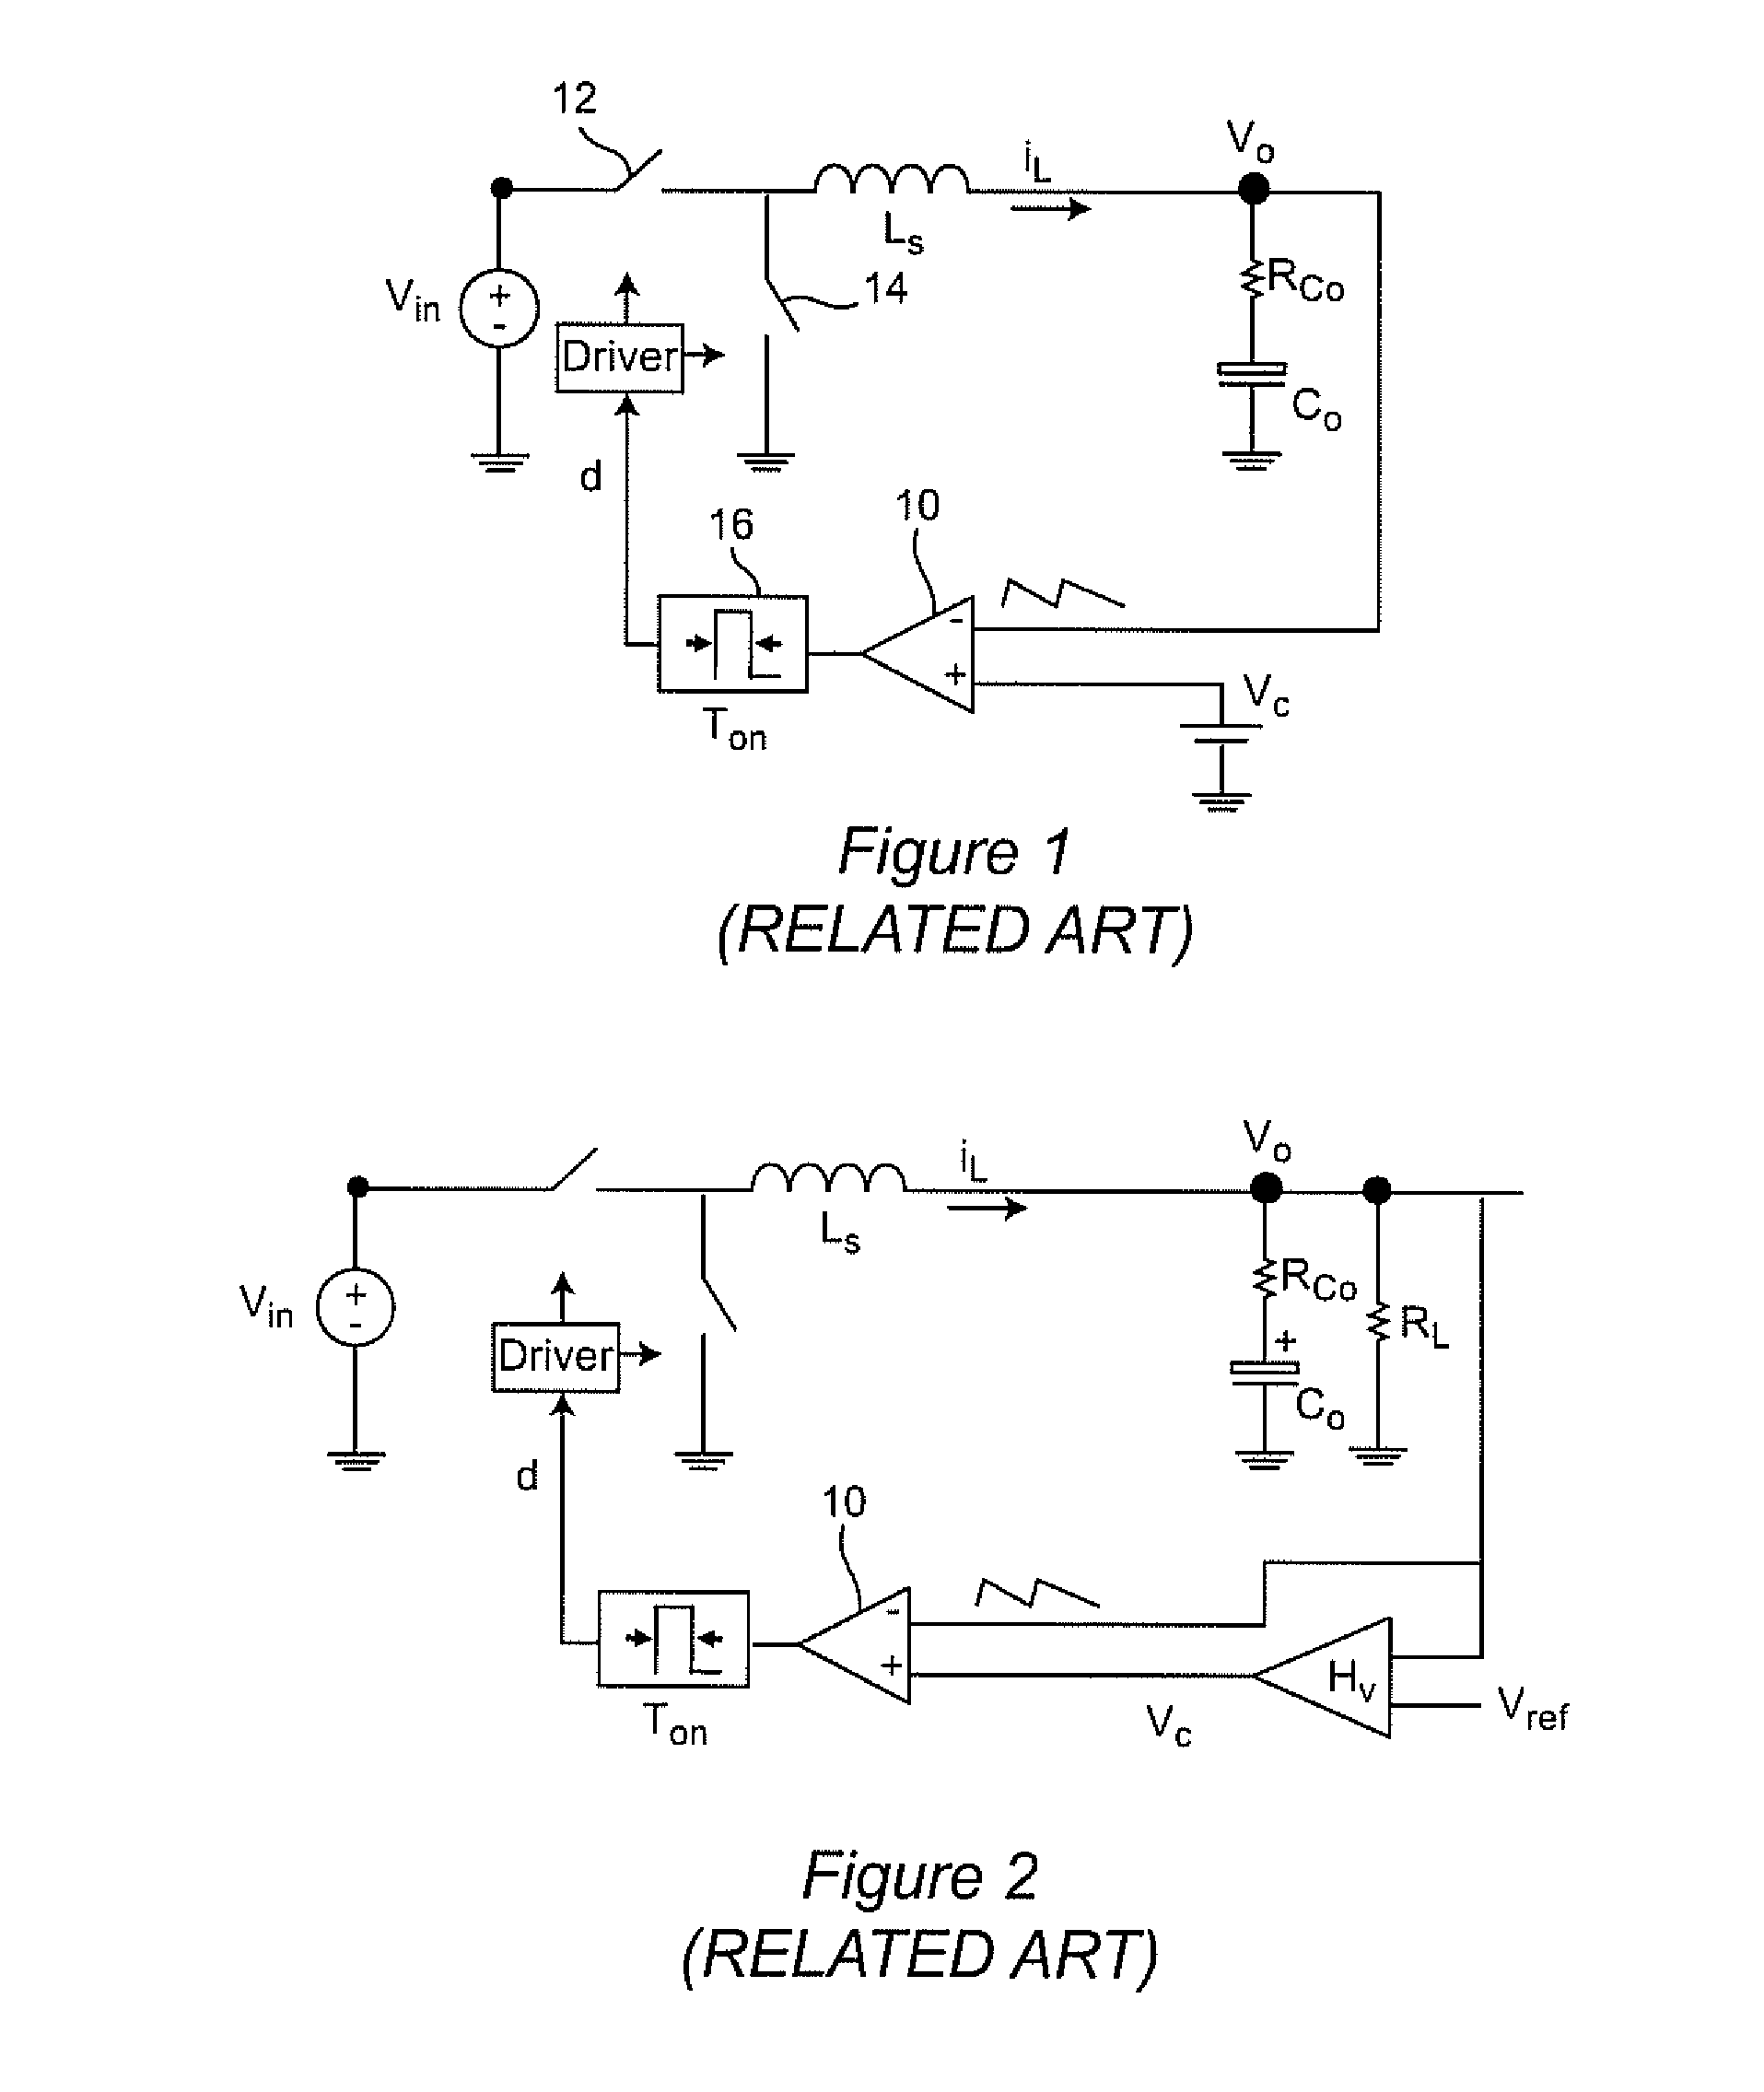 V+hu 2 +l Power Converter Control with Capacitor Current Ramp Compensation